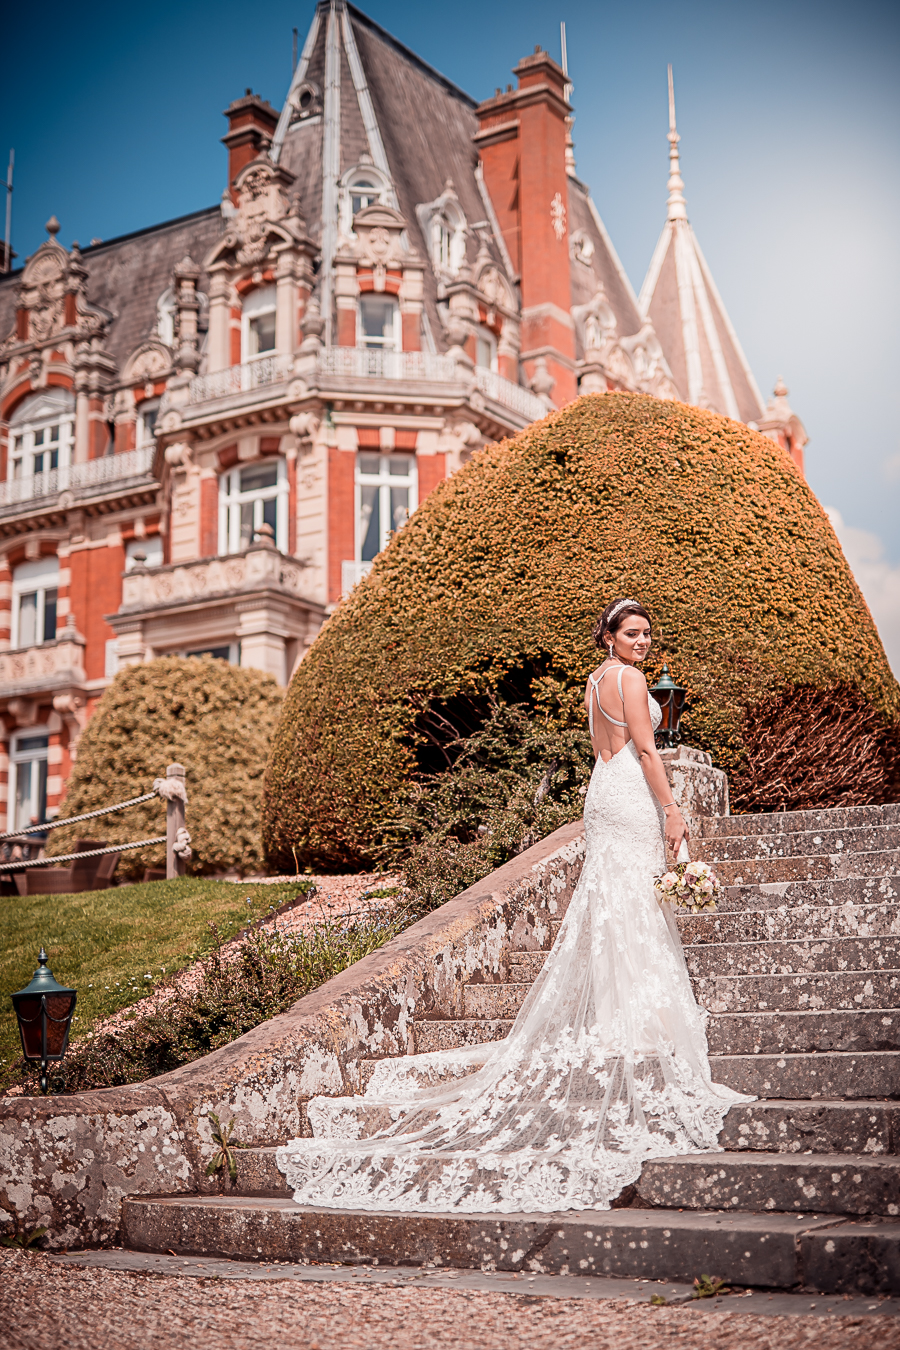 Real wedding at Chateau Impney classic glamorous style, Nicholas Rogers Photography (21)